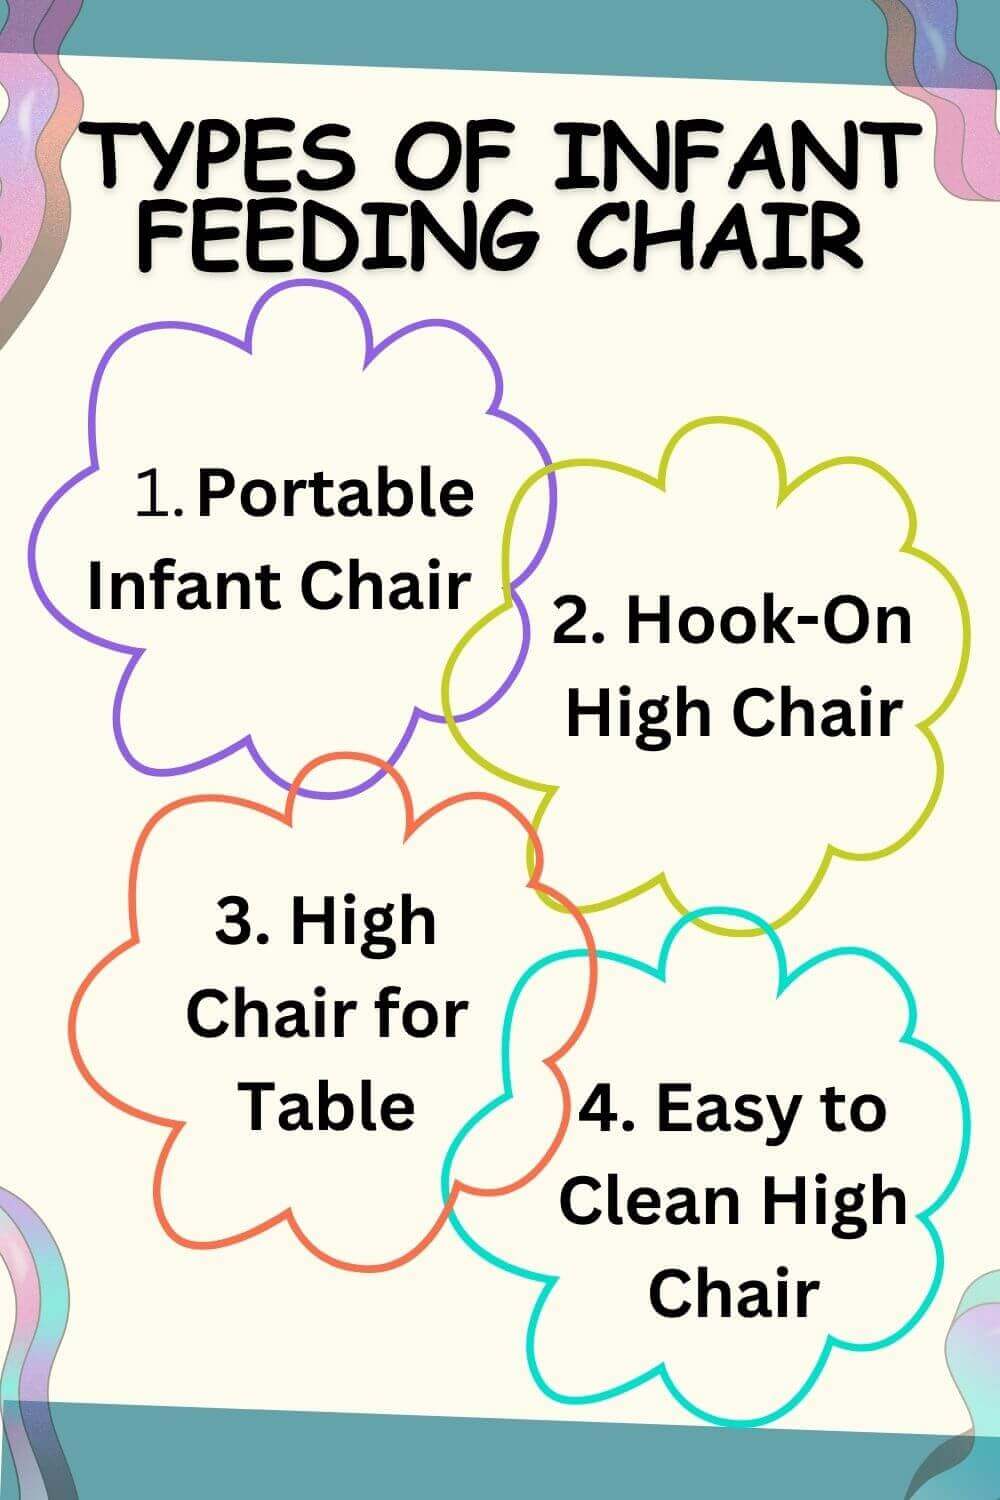 Types of Infant Feeding Chairs